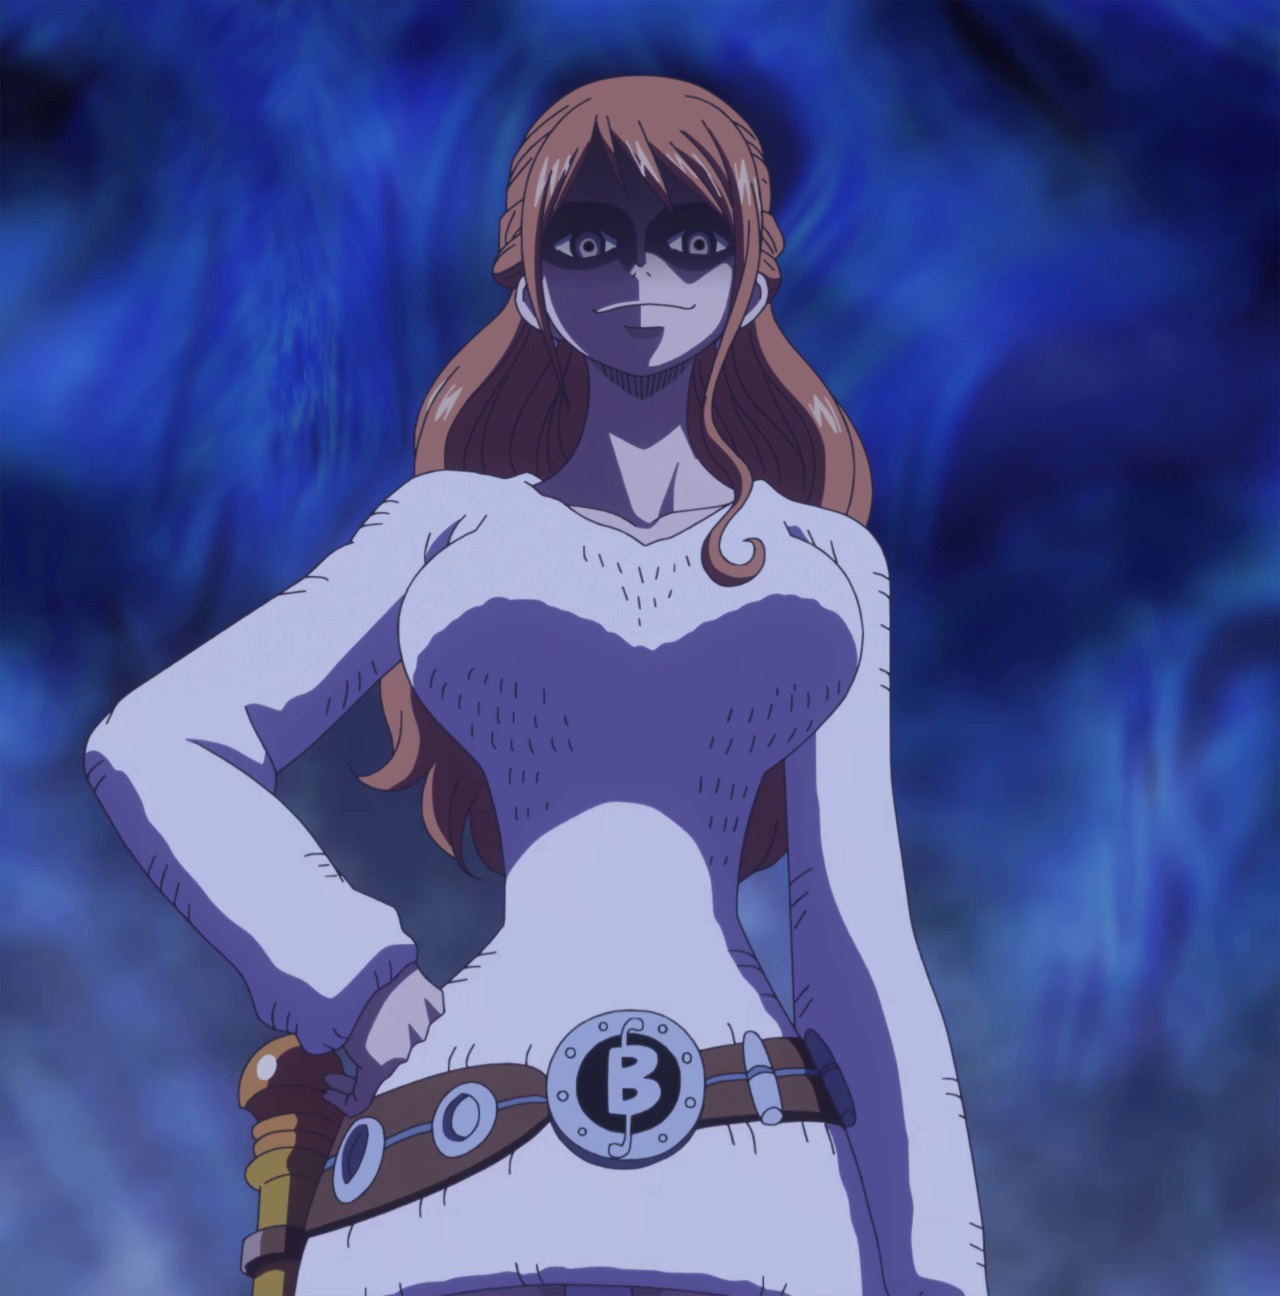 Nami One Piece Ep 865 By Berg Anime On Deviantart